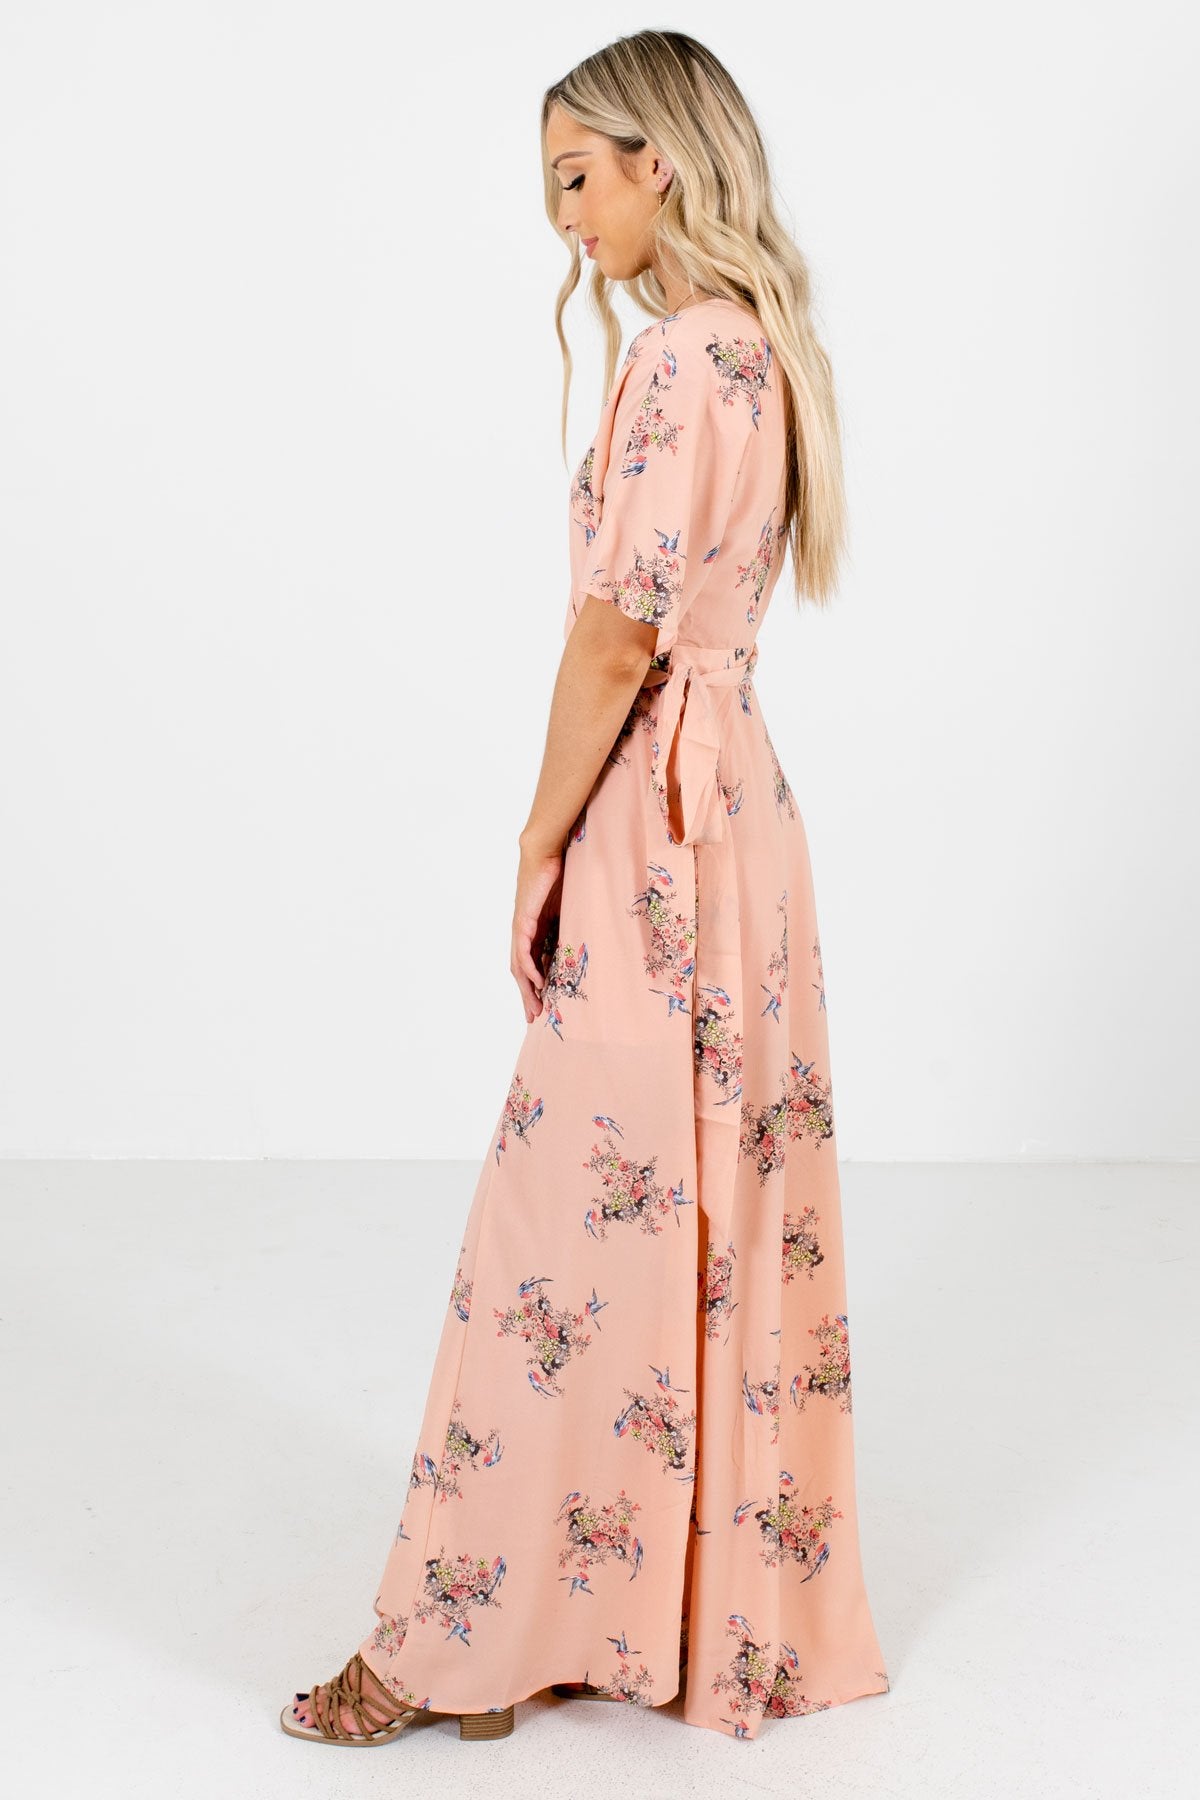 Peach Pink Bird Patterned Boutique Maxi Dresses for Women